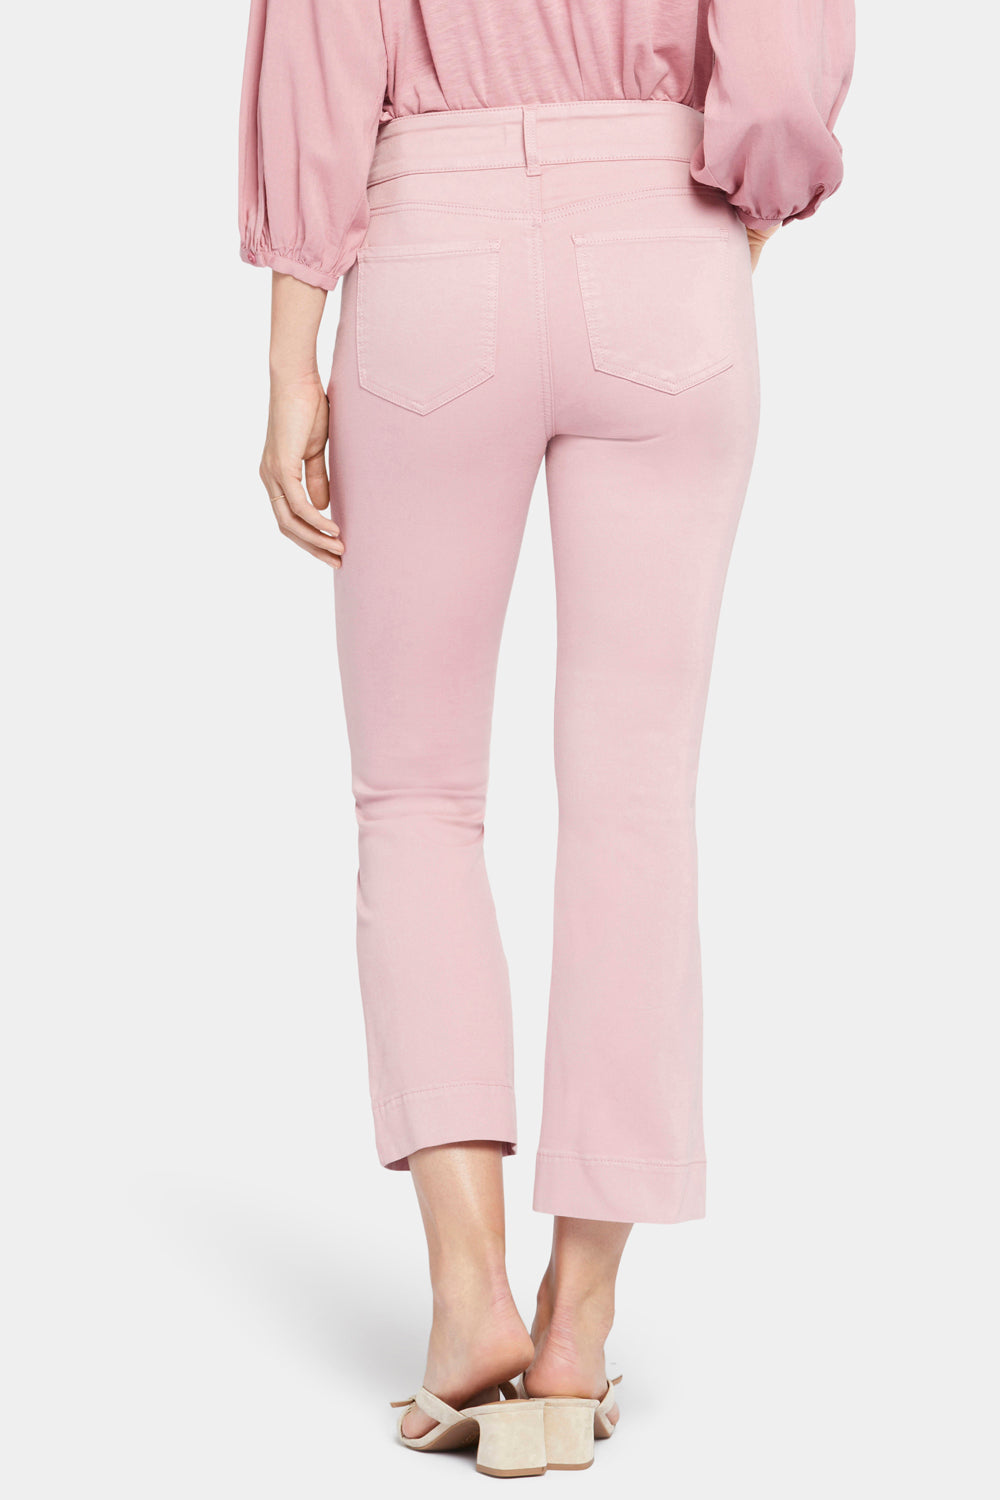 NYDJ Barbara Bootcut Ankle Jeans With High Rise  - Vintage Pink